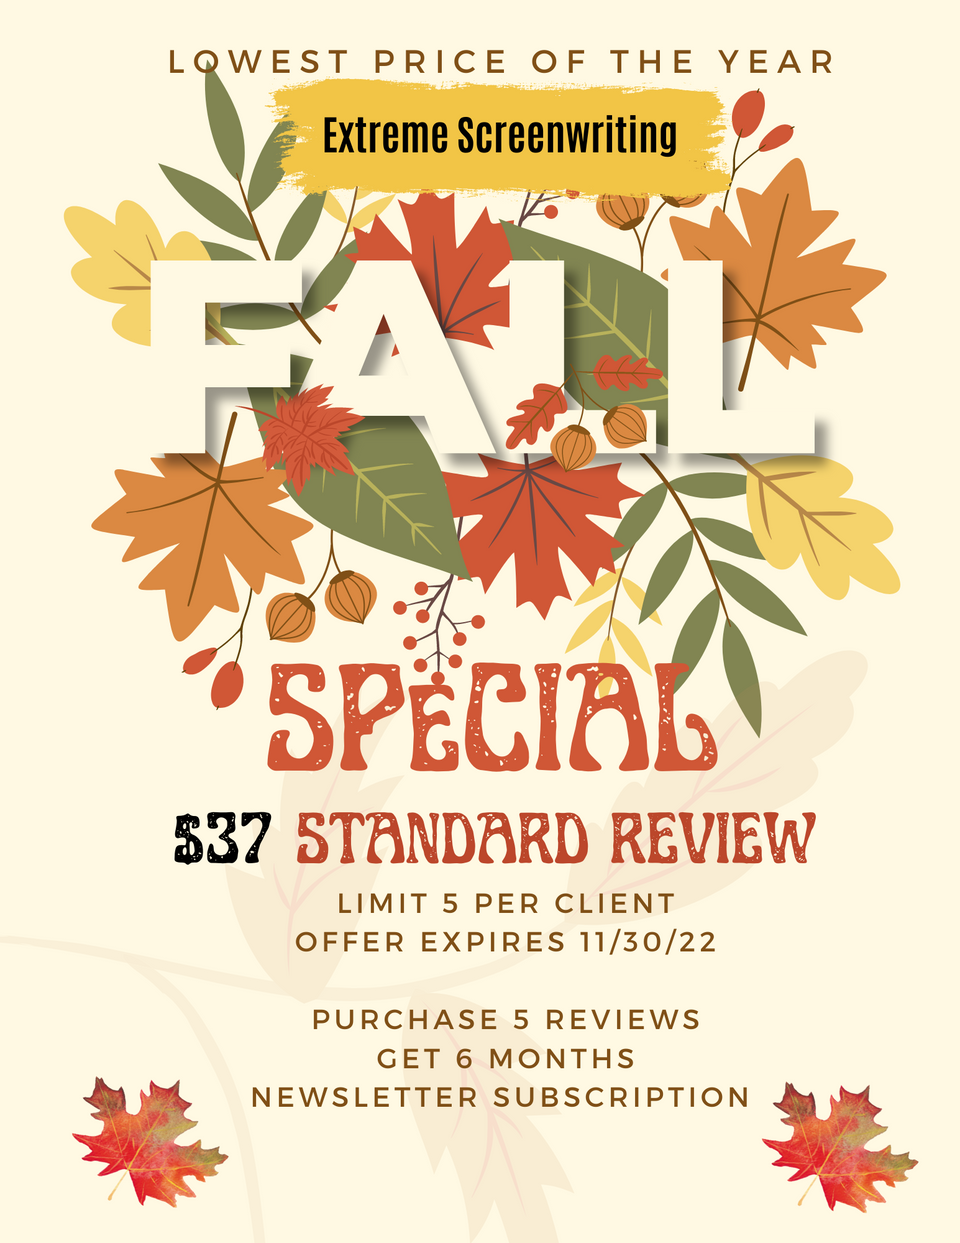 $37 Standard Review Expires Soon!